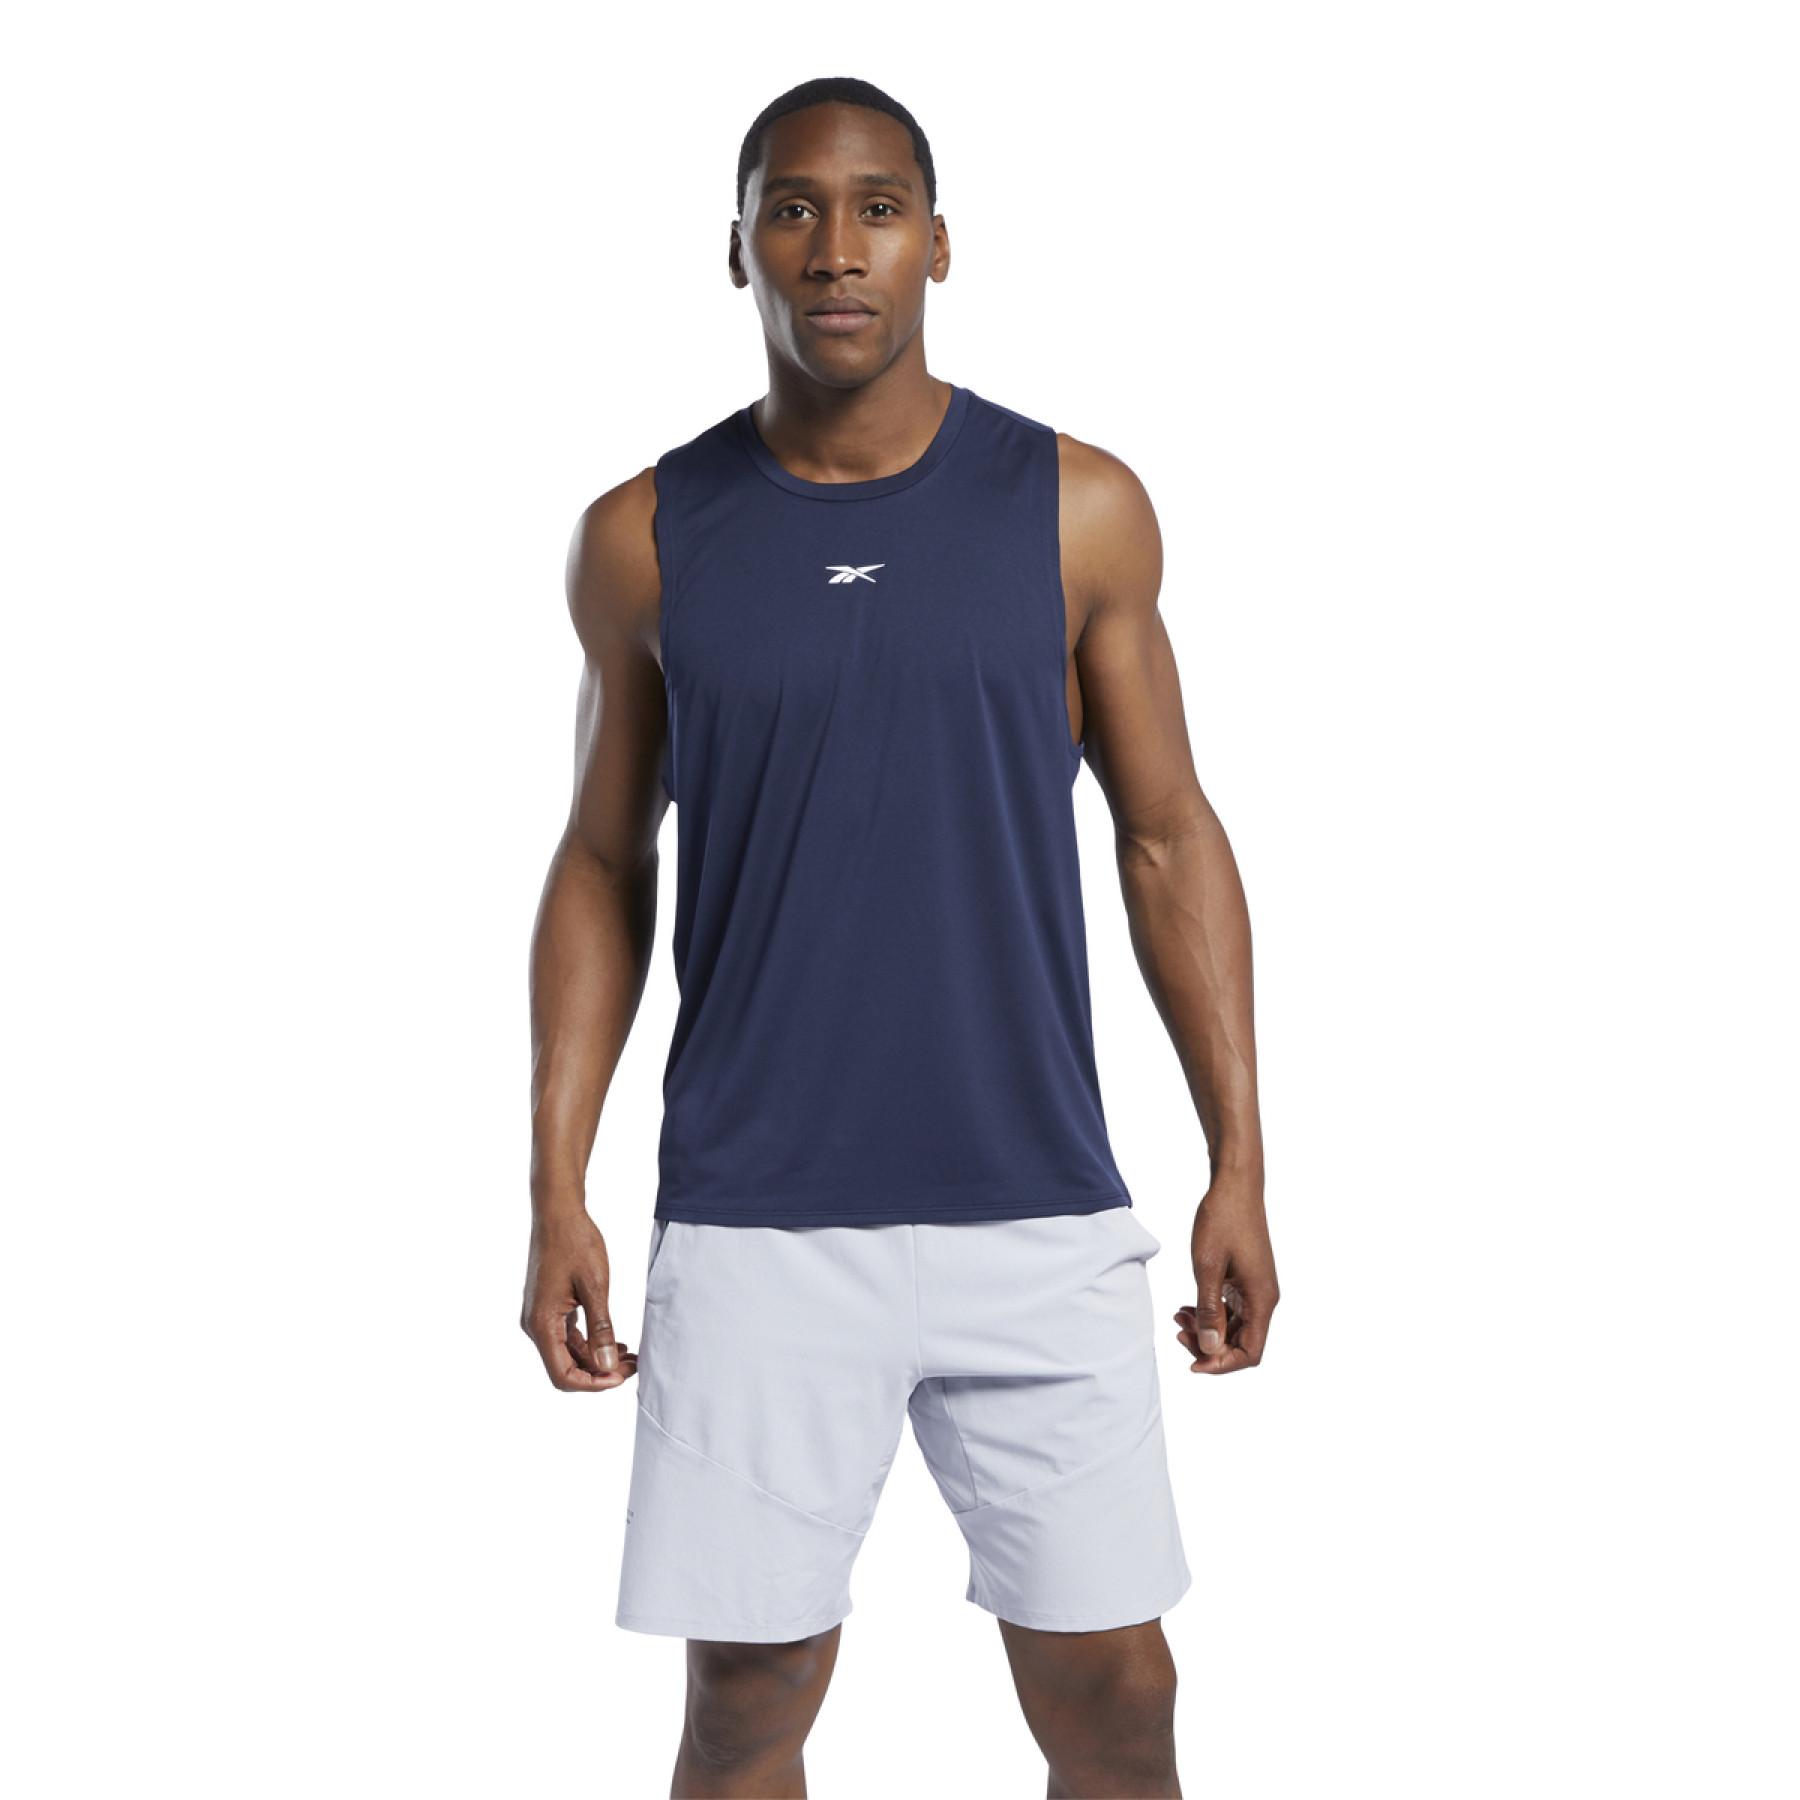 Tampo do tanque Reebok Les Mills® Knit